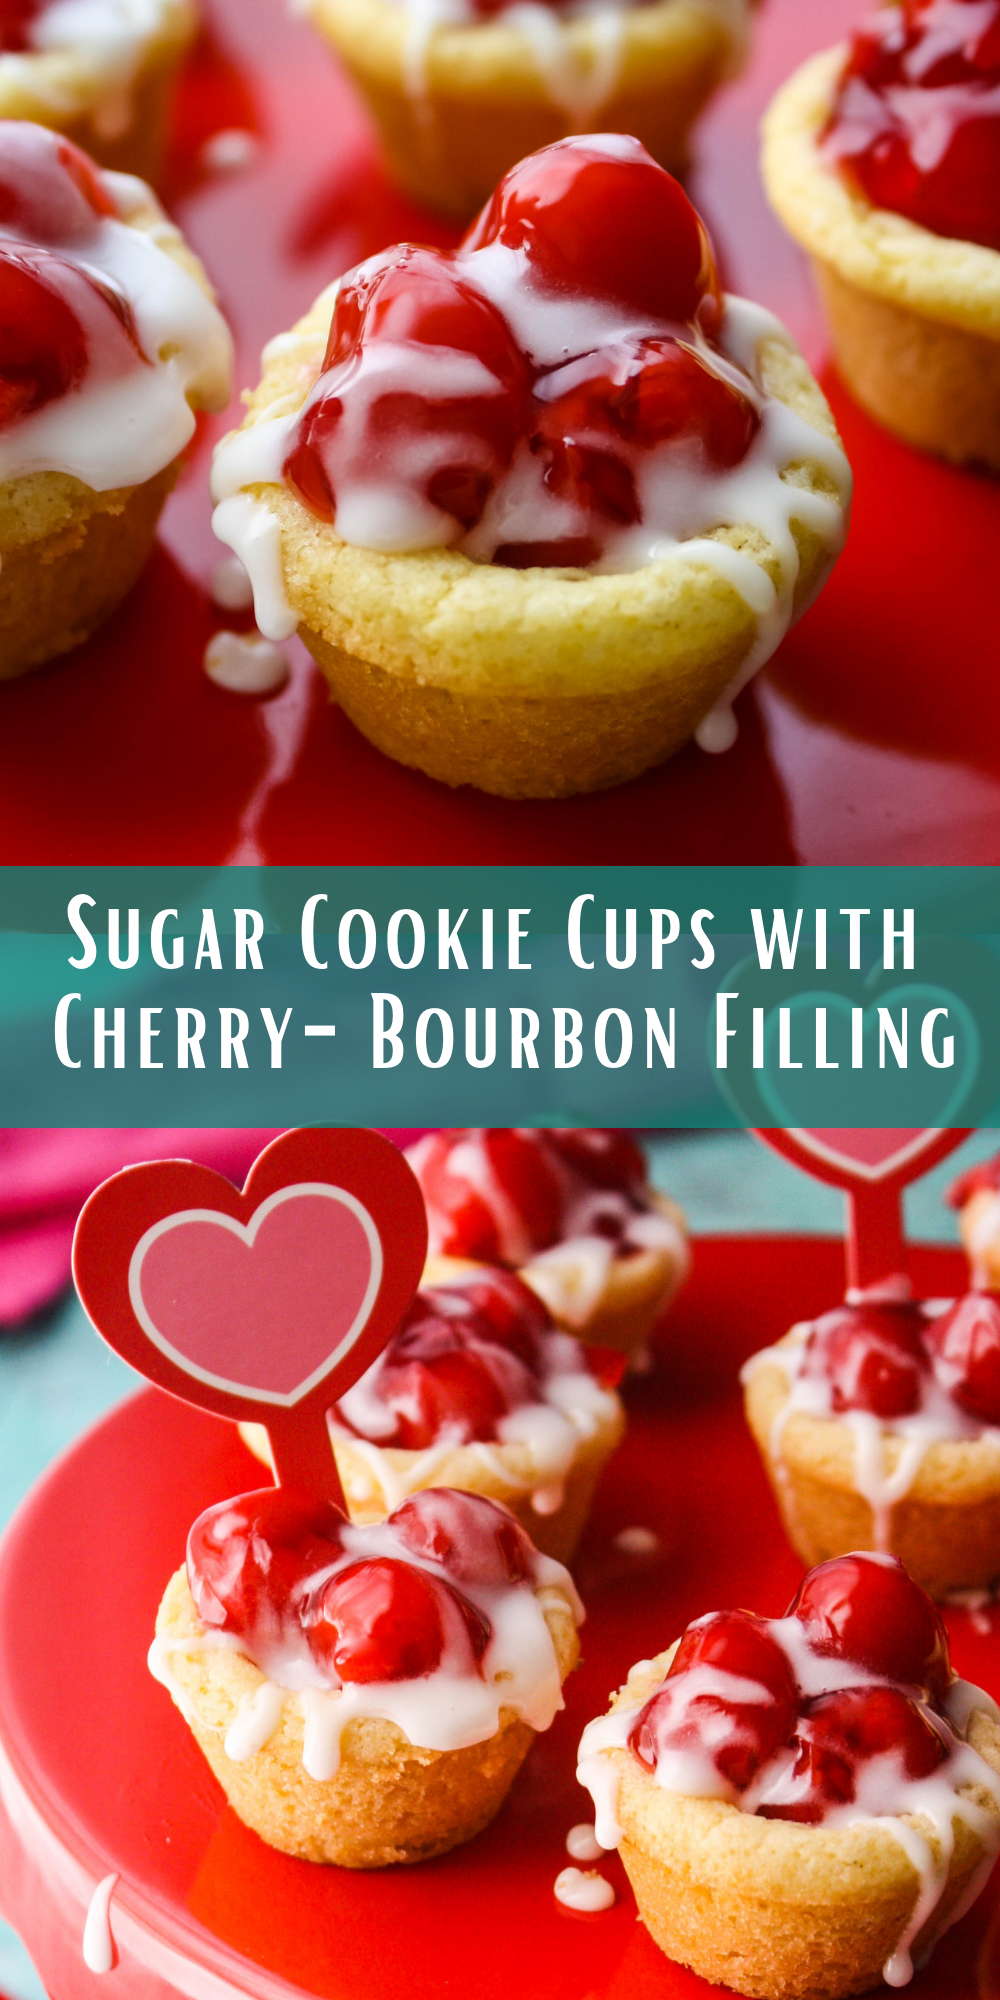 Sugar Cookie Cups with Cherry-Bourbon Filling are easy to make for your next special occasion.